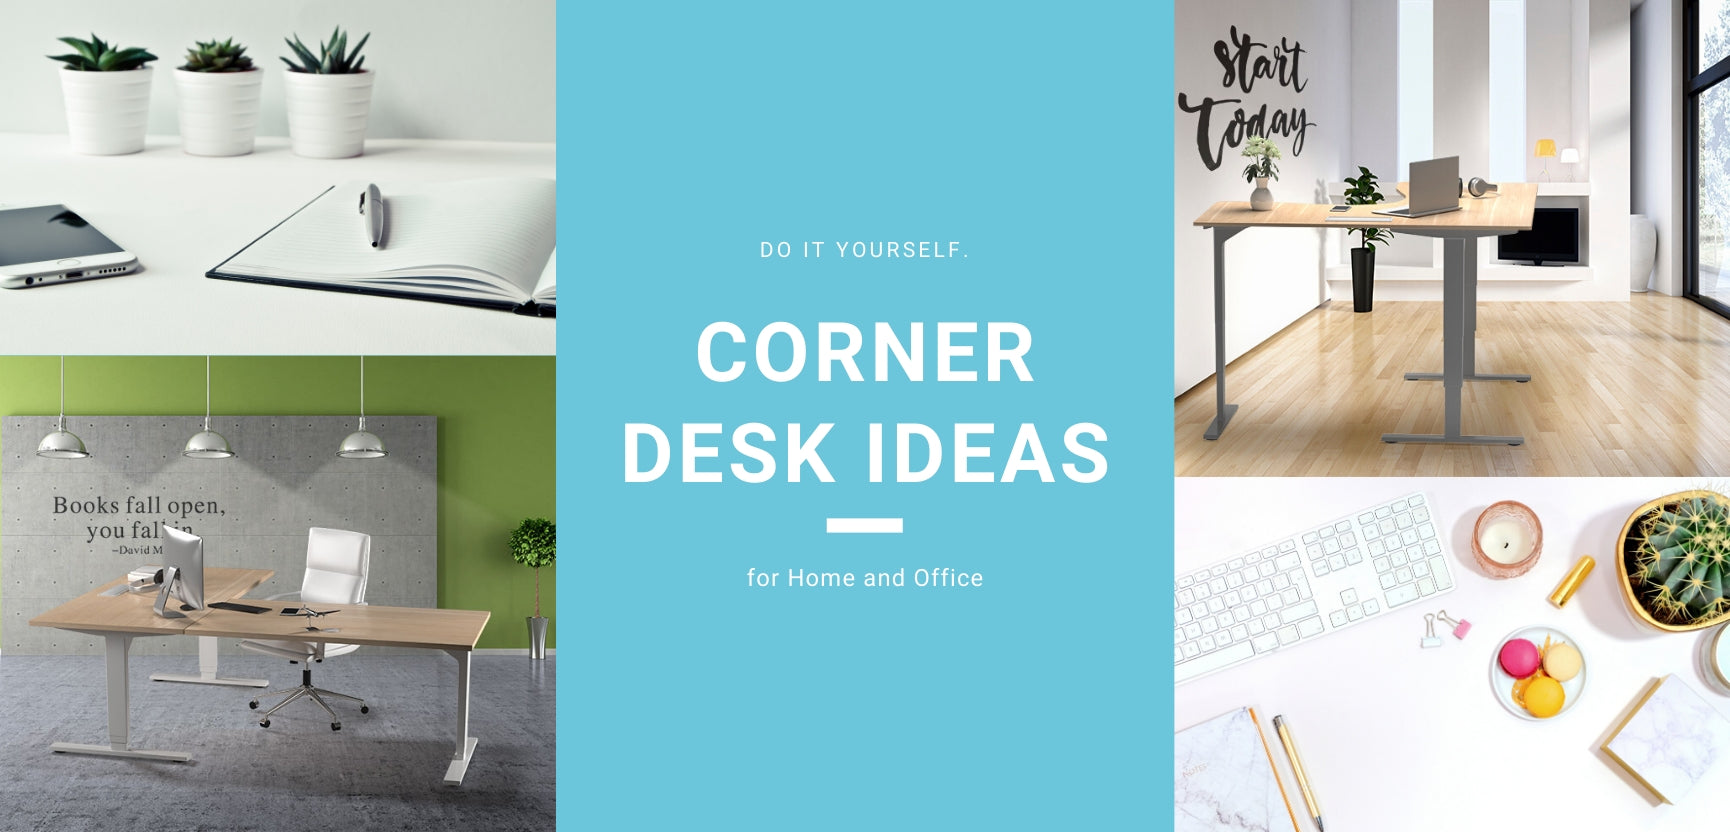 DIY Corner Desk Ideas for Home and Office